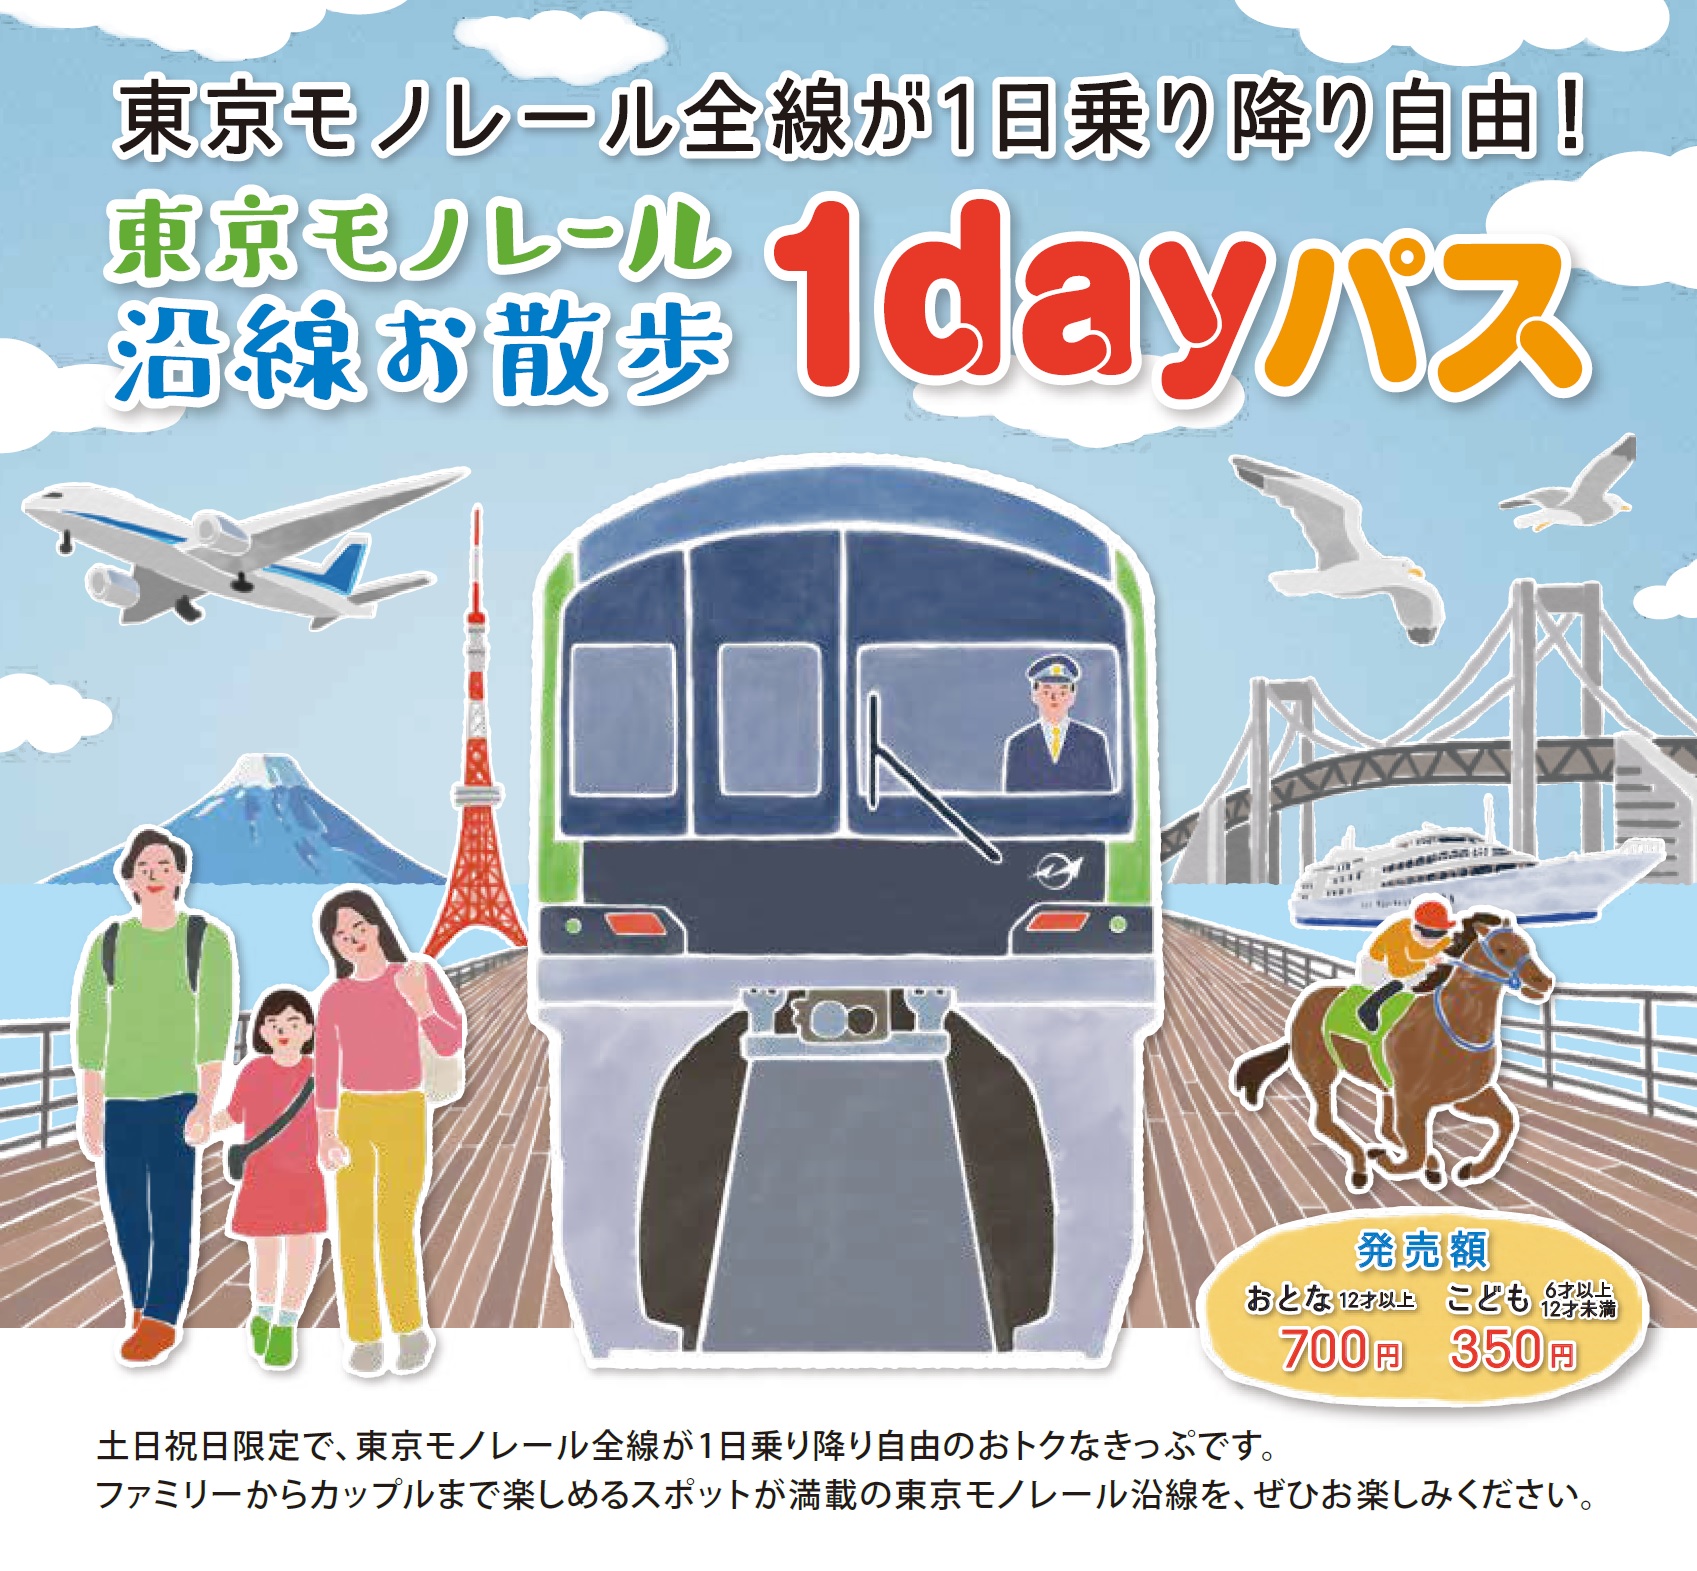 1-day pass for a walk along the Tokyo Monorail